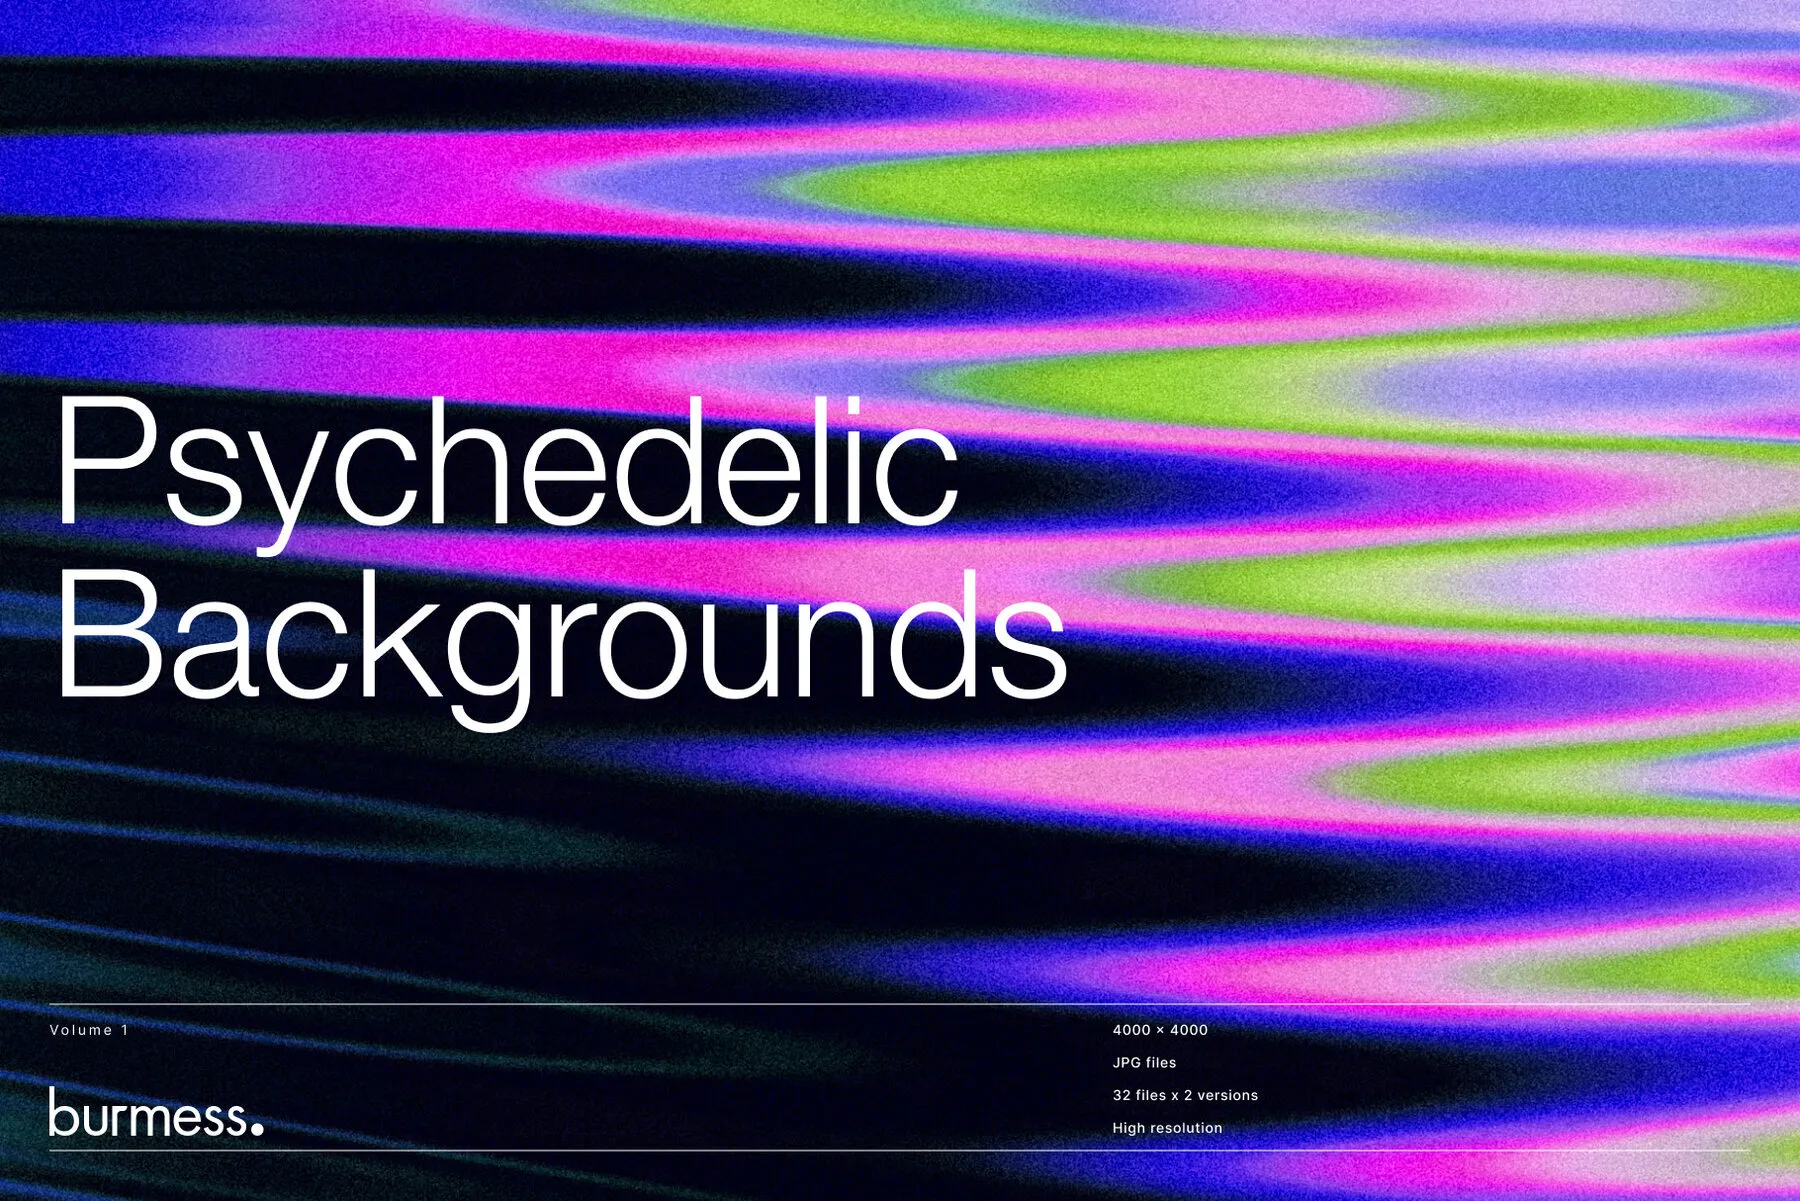 Psychedelic Backgrounds Volume 1